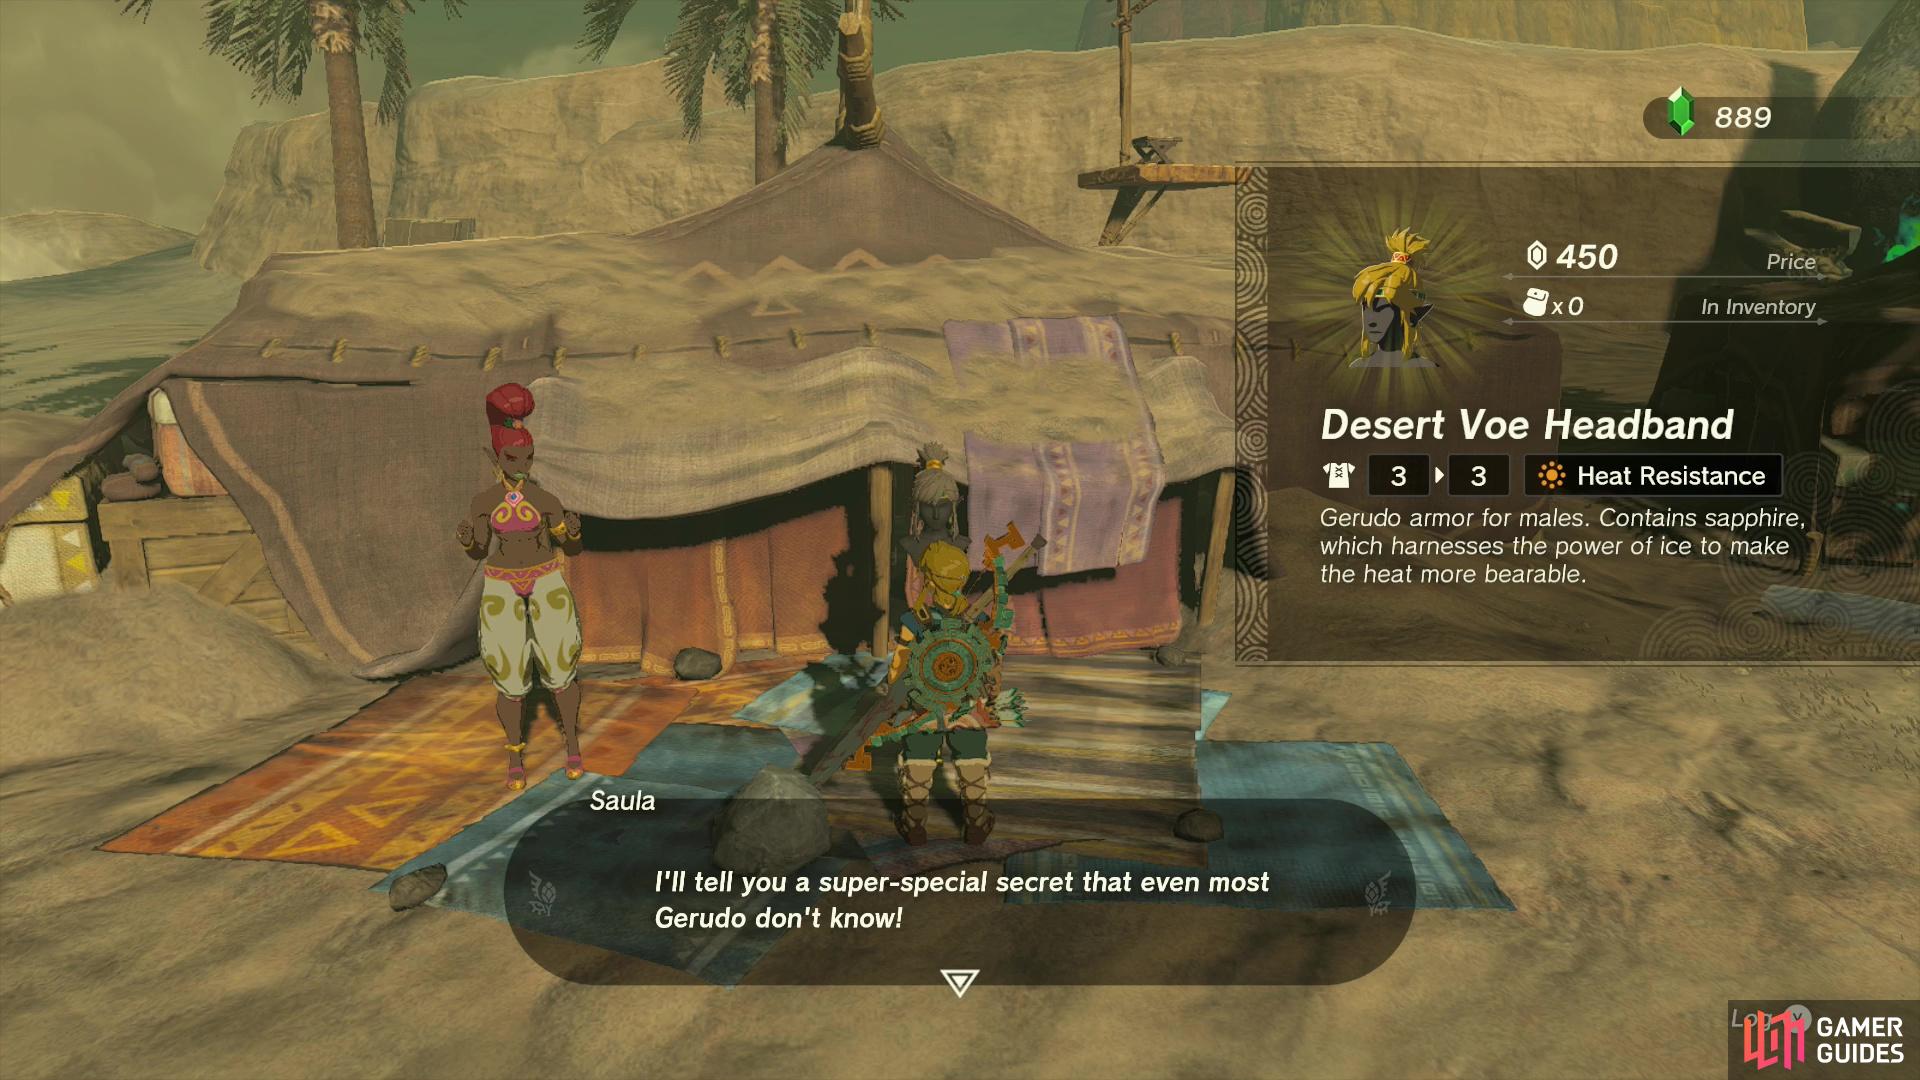 Buy the Desert Voe Headband from Saula in the Kara Kara Bazaar and she’ll tell you about a Secret Shop in Gerudo Town.